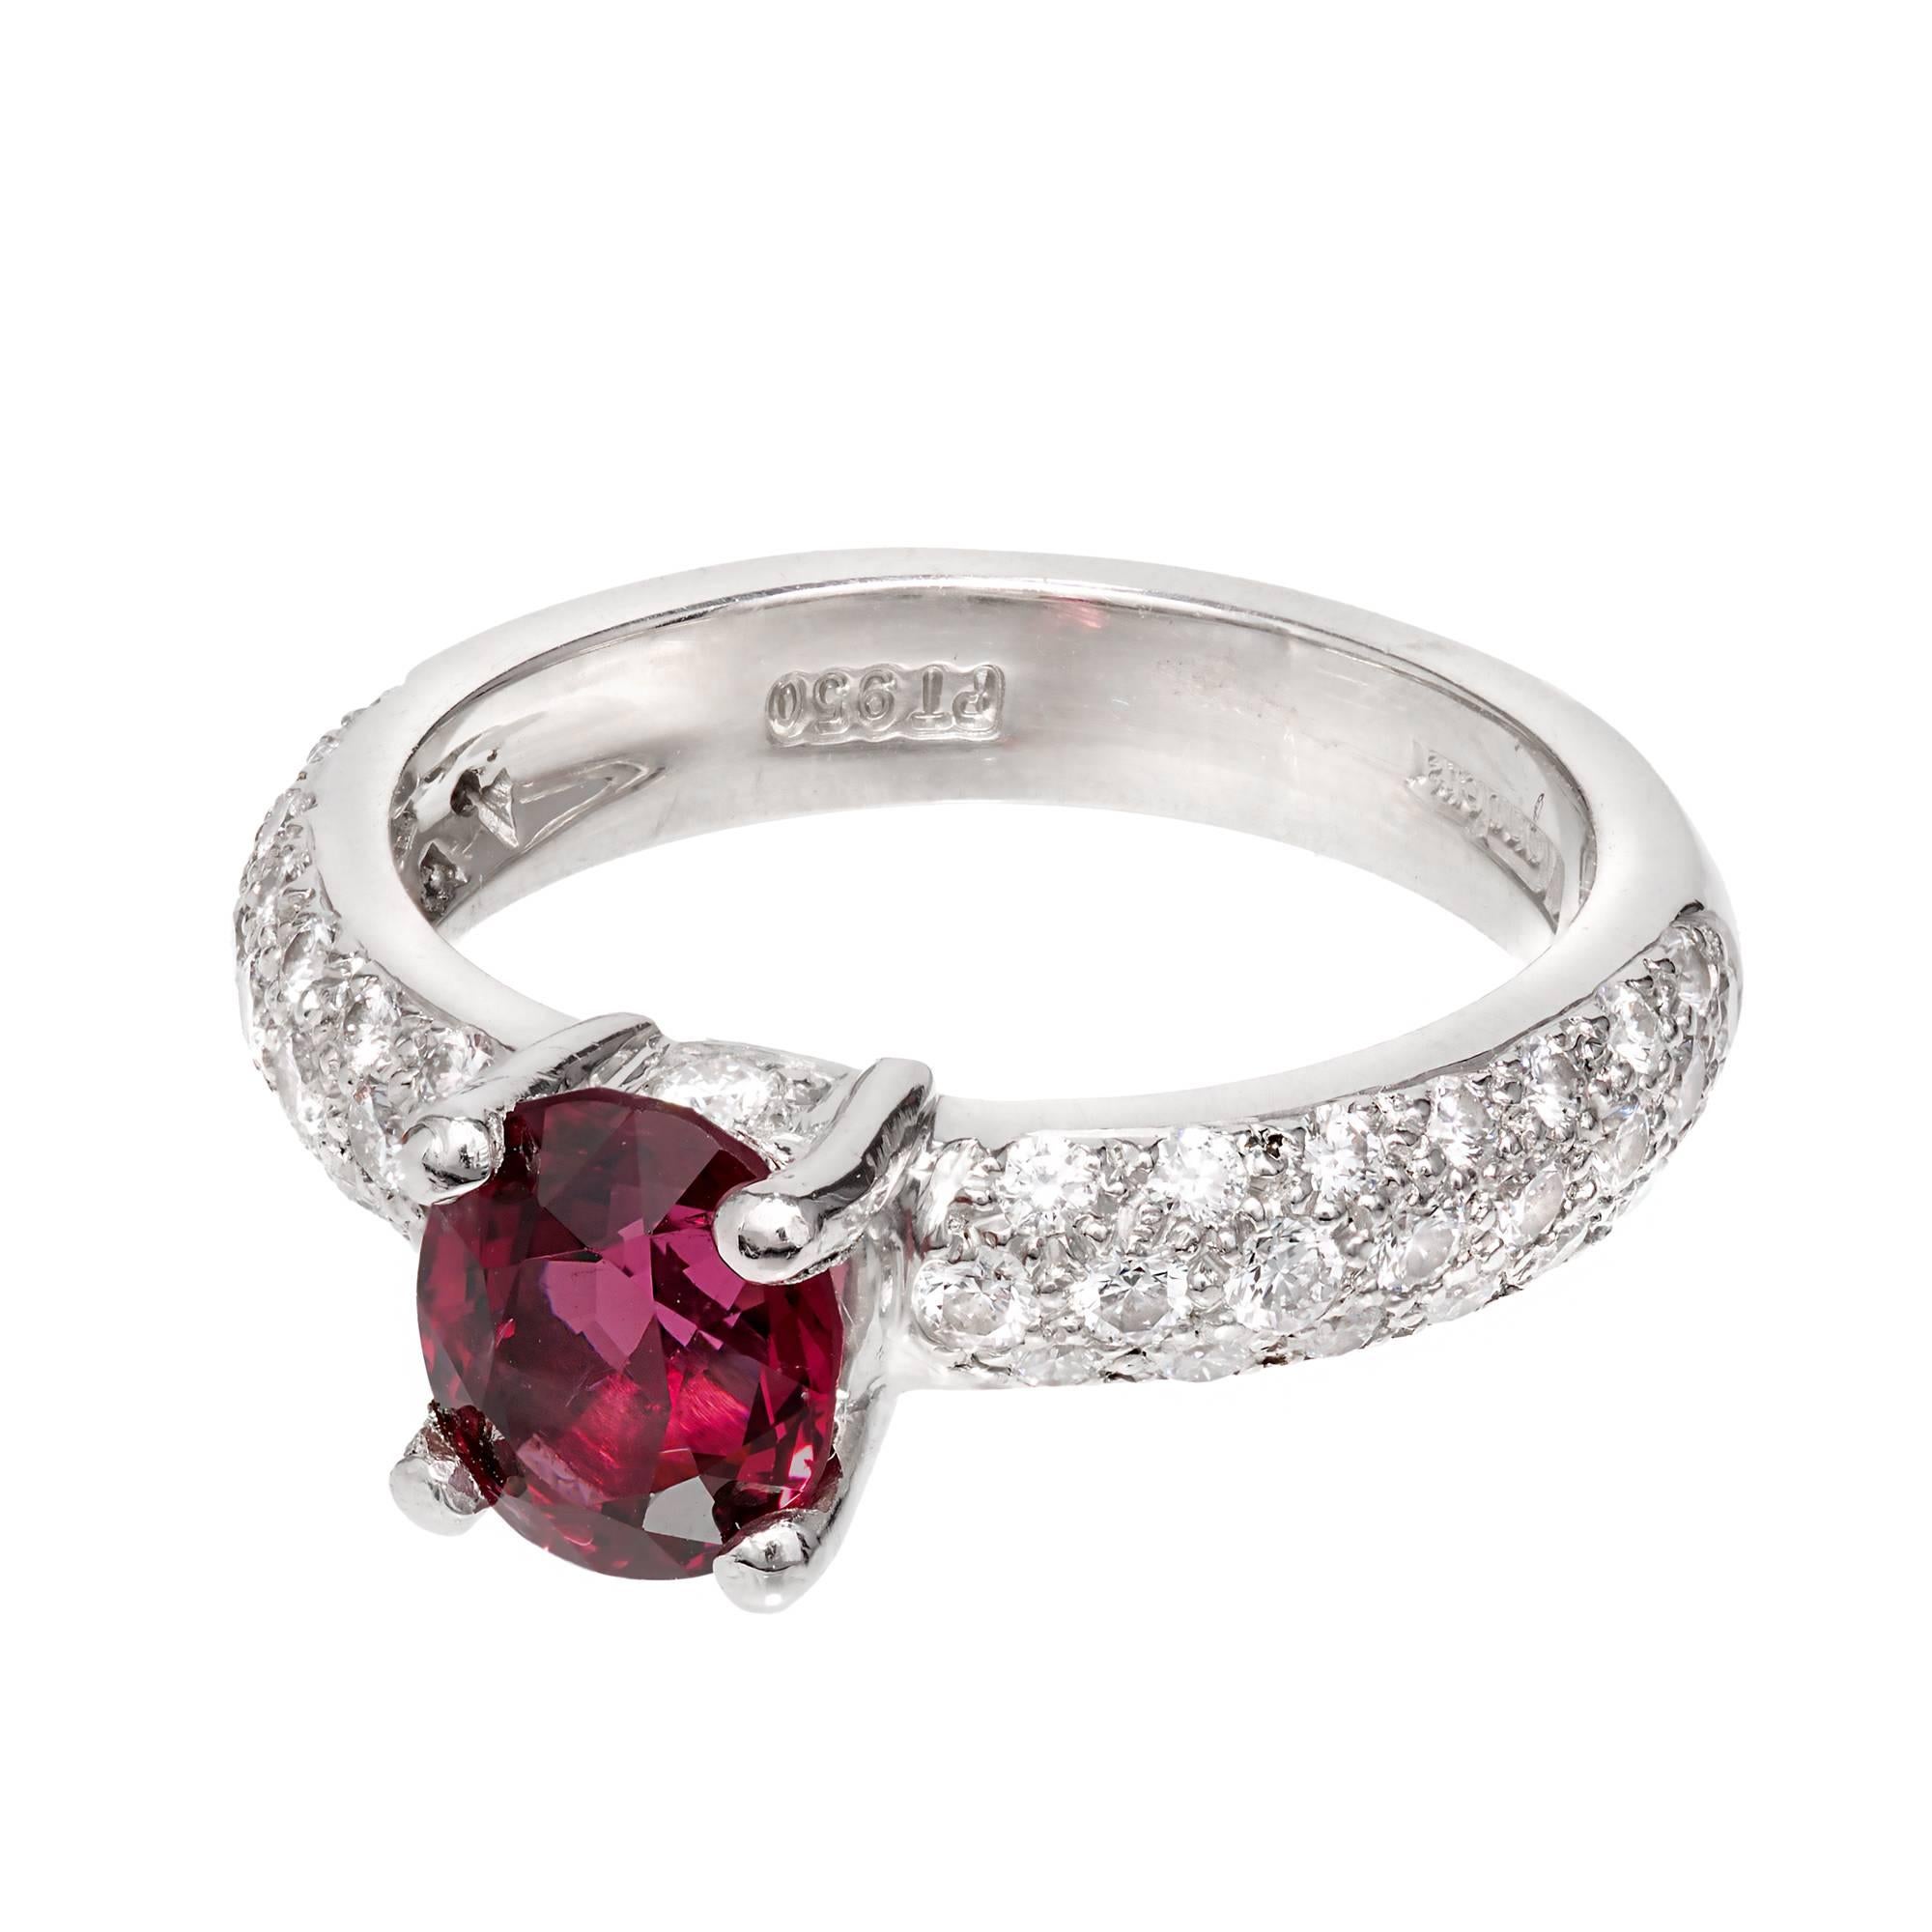 Bright red natural GIA certified Spinel in a beautiful Mondera pave set Platinum Diamond engagement ring.

1 oval purplish red Spinel, approx. total weight 1.59cts, SI, 7.45 x 6.32 x 4.75mm, GIA certificate #1186118061
46 round full cut Diamonds,